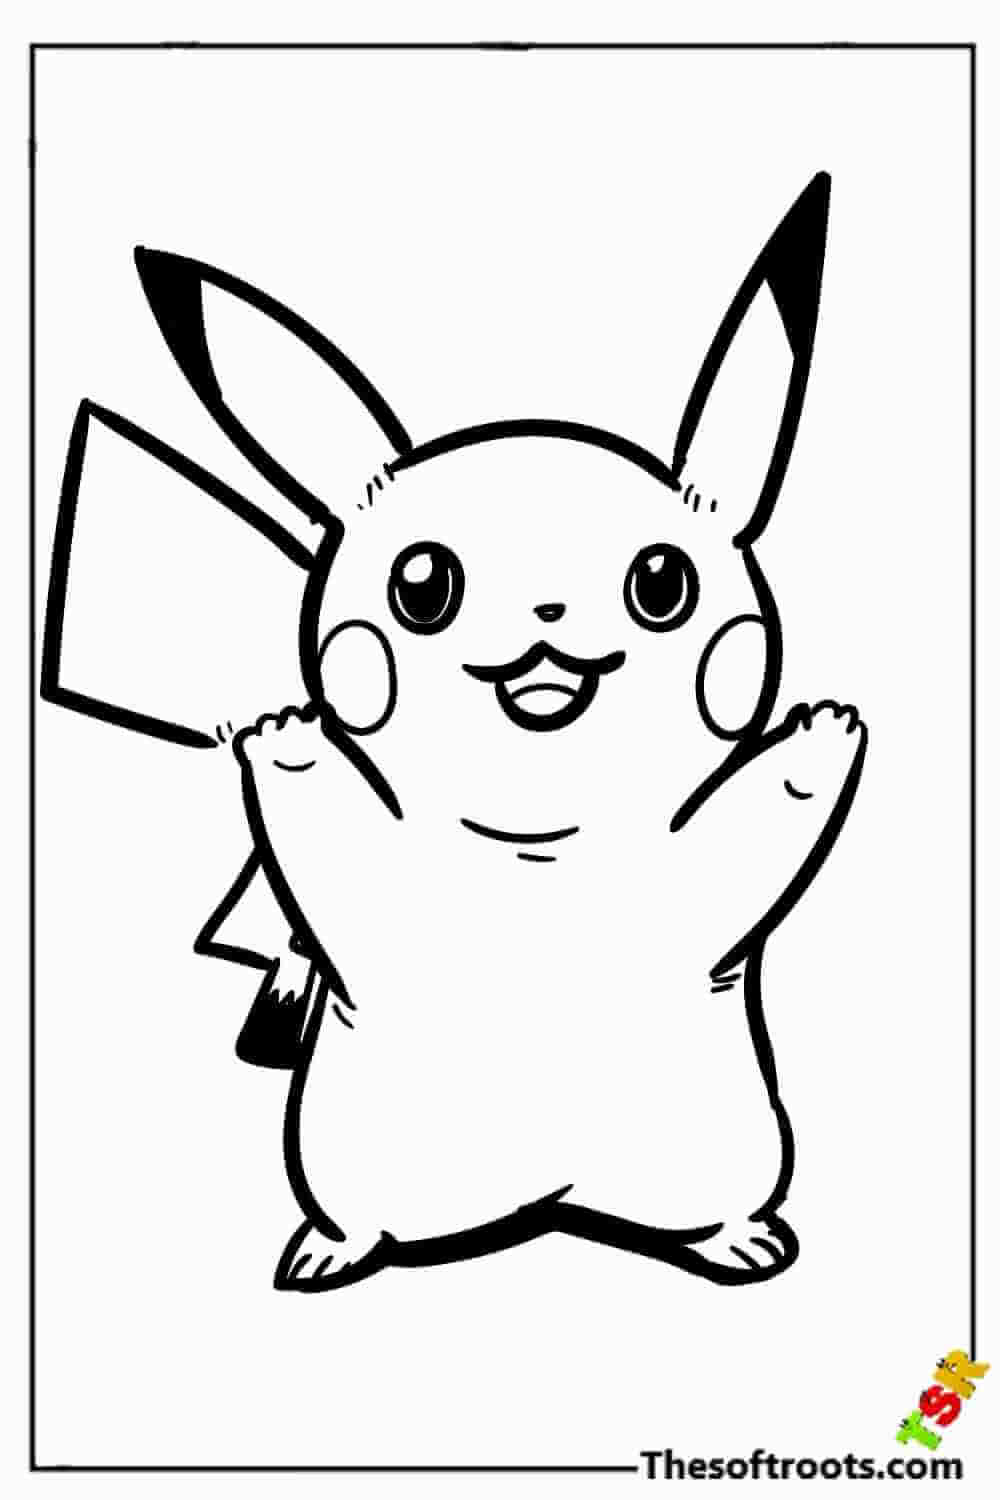 Black and white Pikachu coloring pages